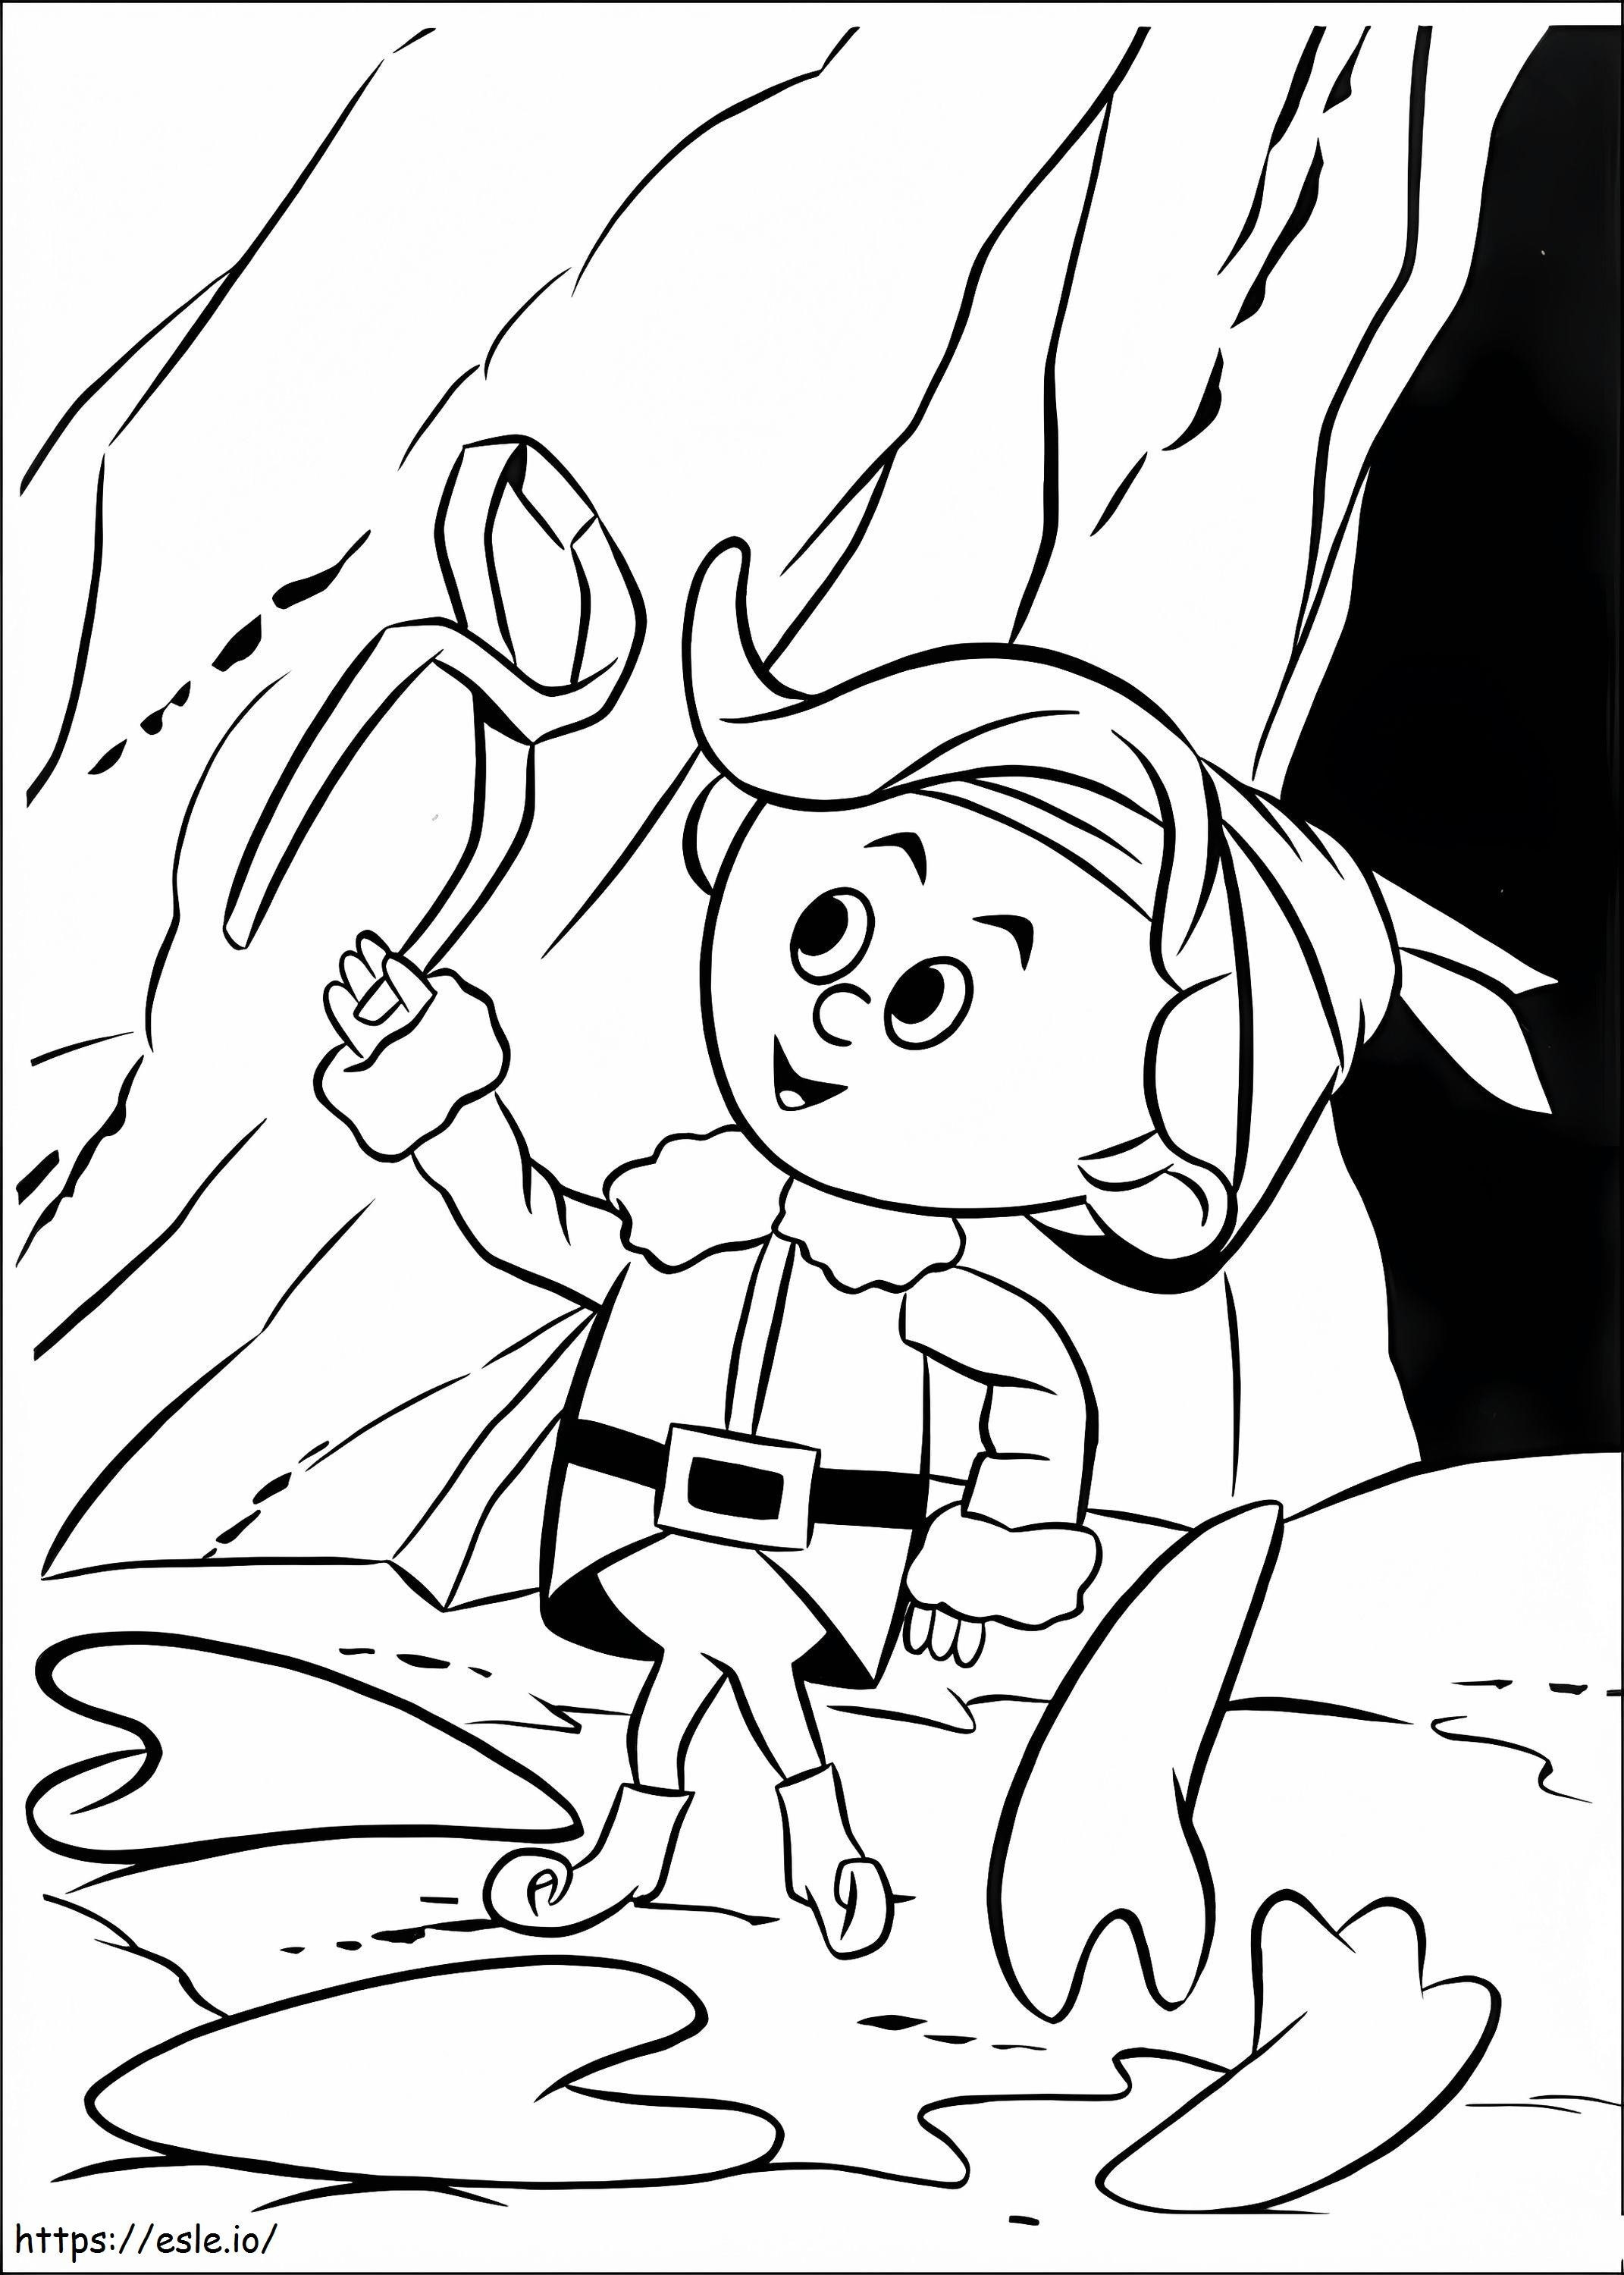 Elf From Rudolph coloring page